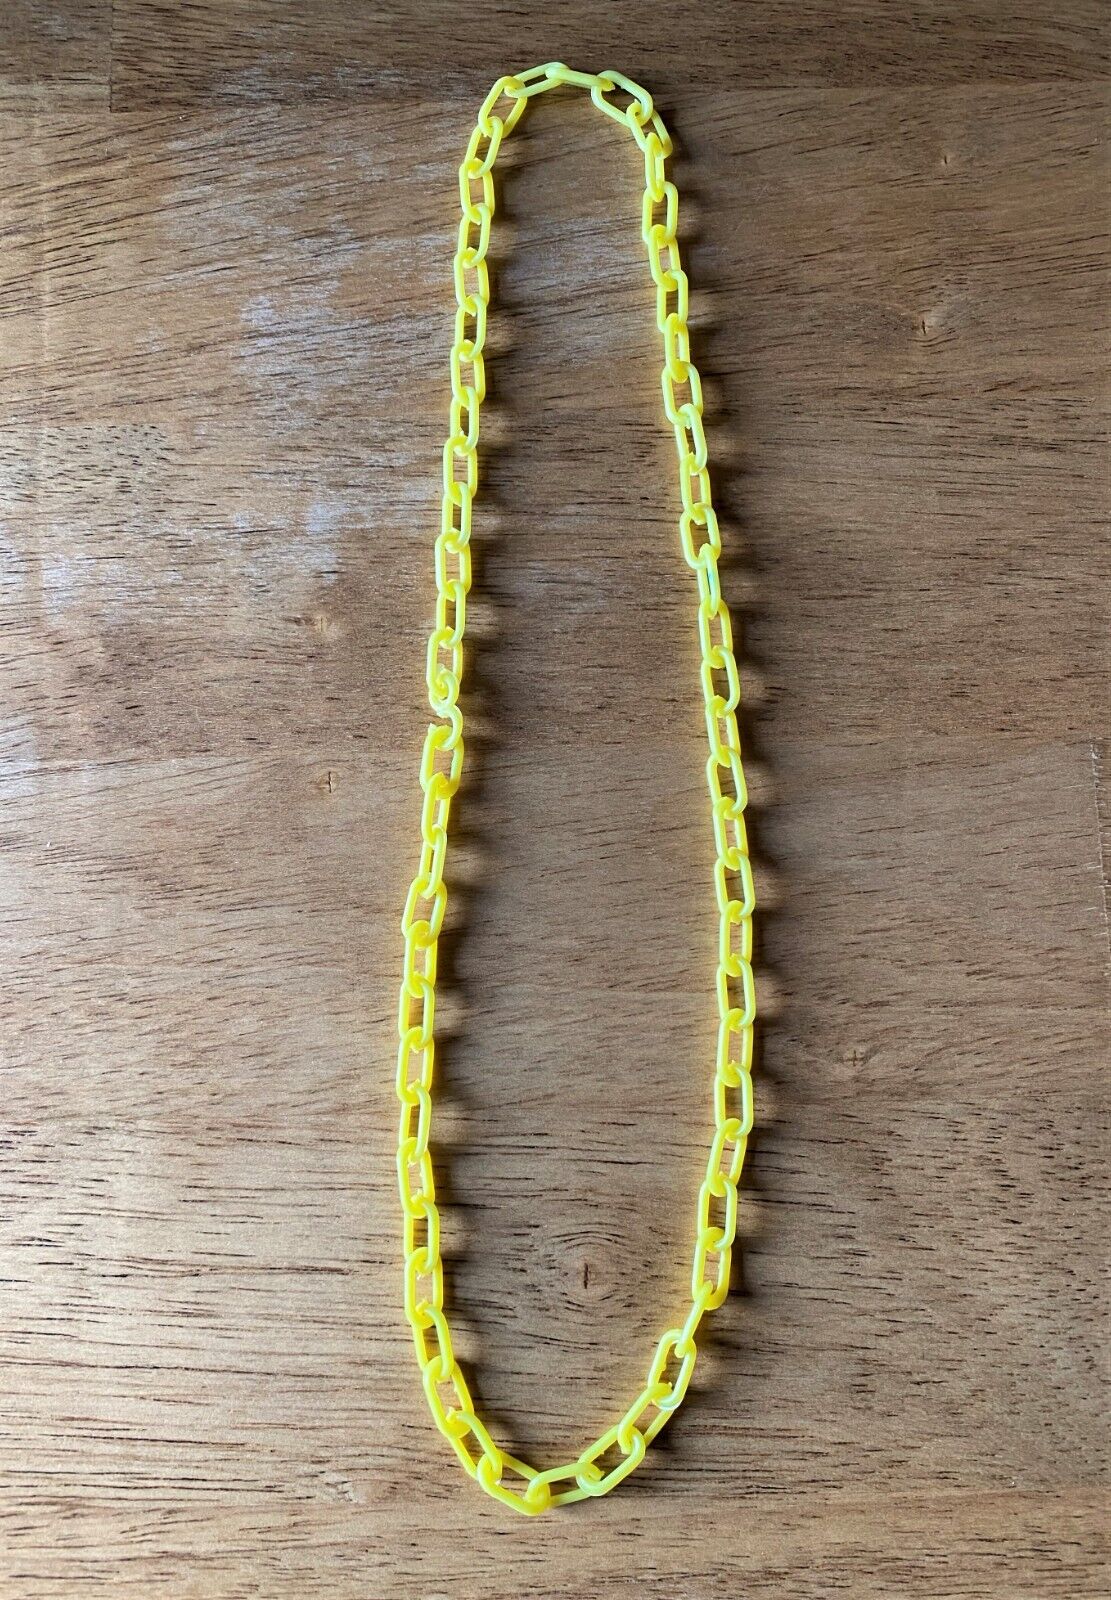 Vintage 1980s Plastic Yellow Chain Link Necklace for Retro Clip-On Charms